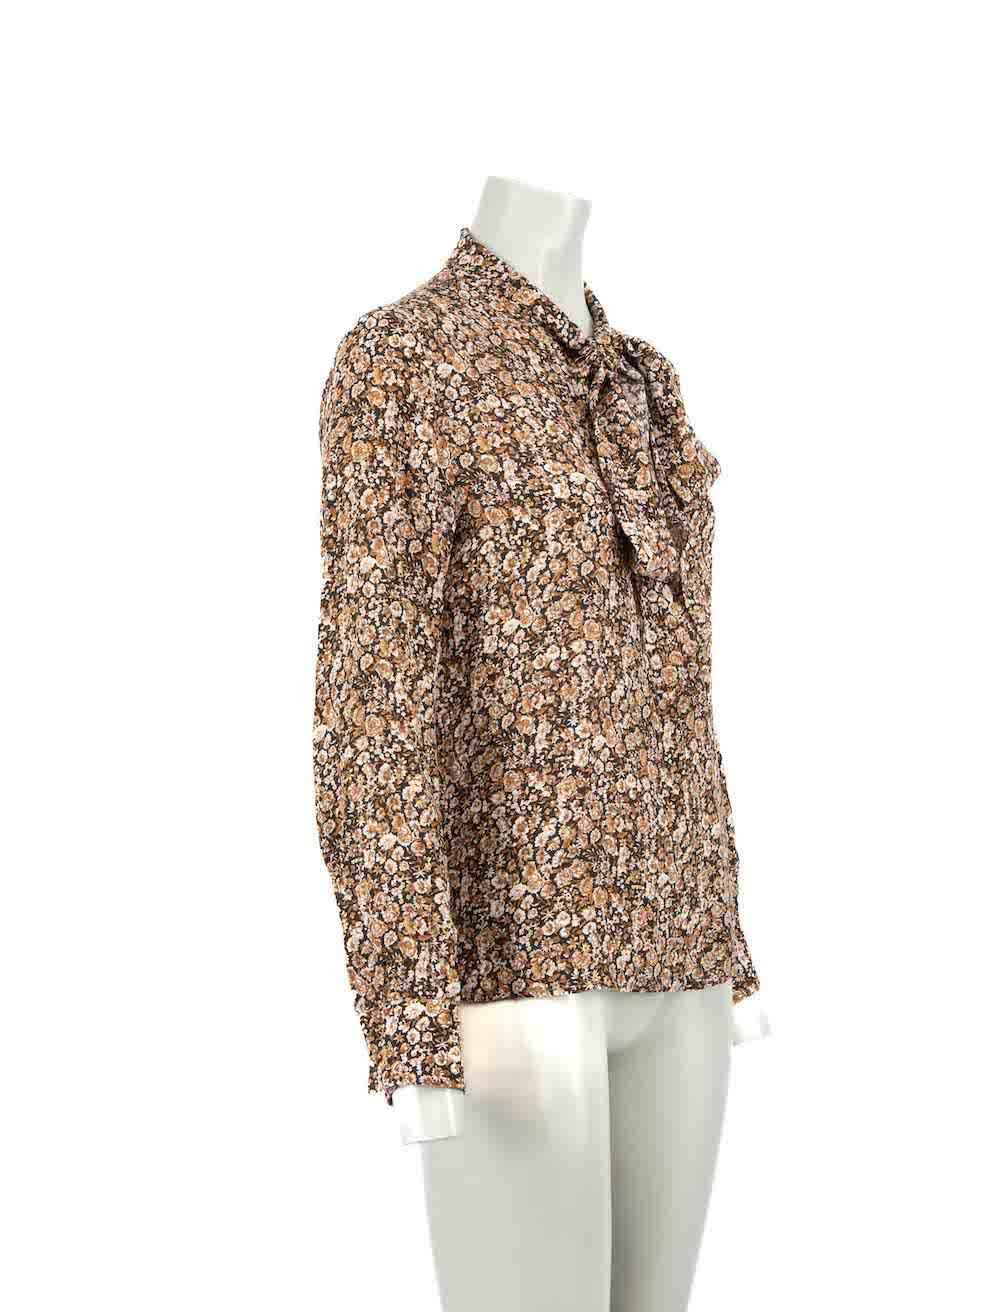 CONDITION is Very good. Hardly any visible wear to blouse is evident on this used Max Mara Studio designer resale item.
 
Details
Brown
Silk
Long sleeves blouse
Floral print pattern
Front button up closure
Tie neck strap closure
Buttoned cuffs
Made